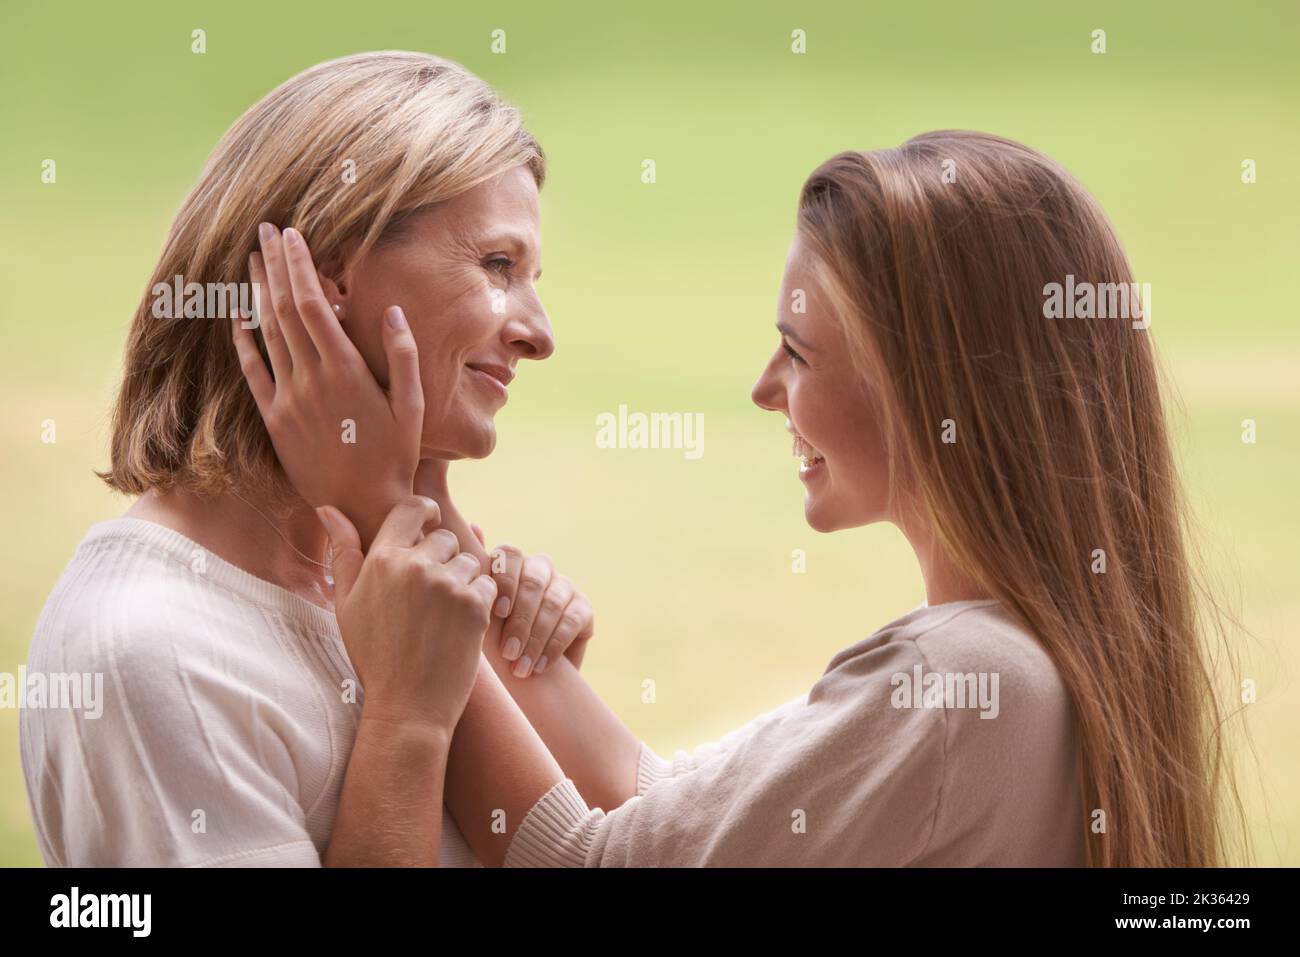 She appreciates her mother so much. A daughter being affectionate towards her mother. Stock Photo